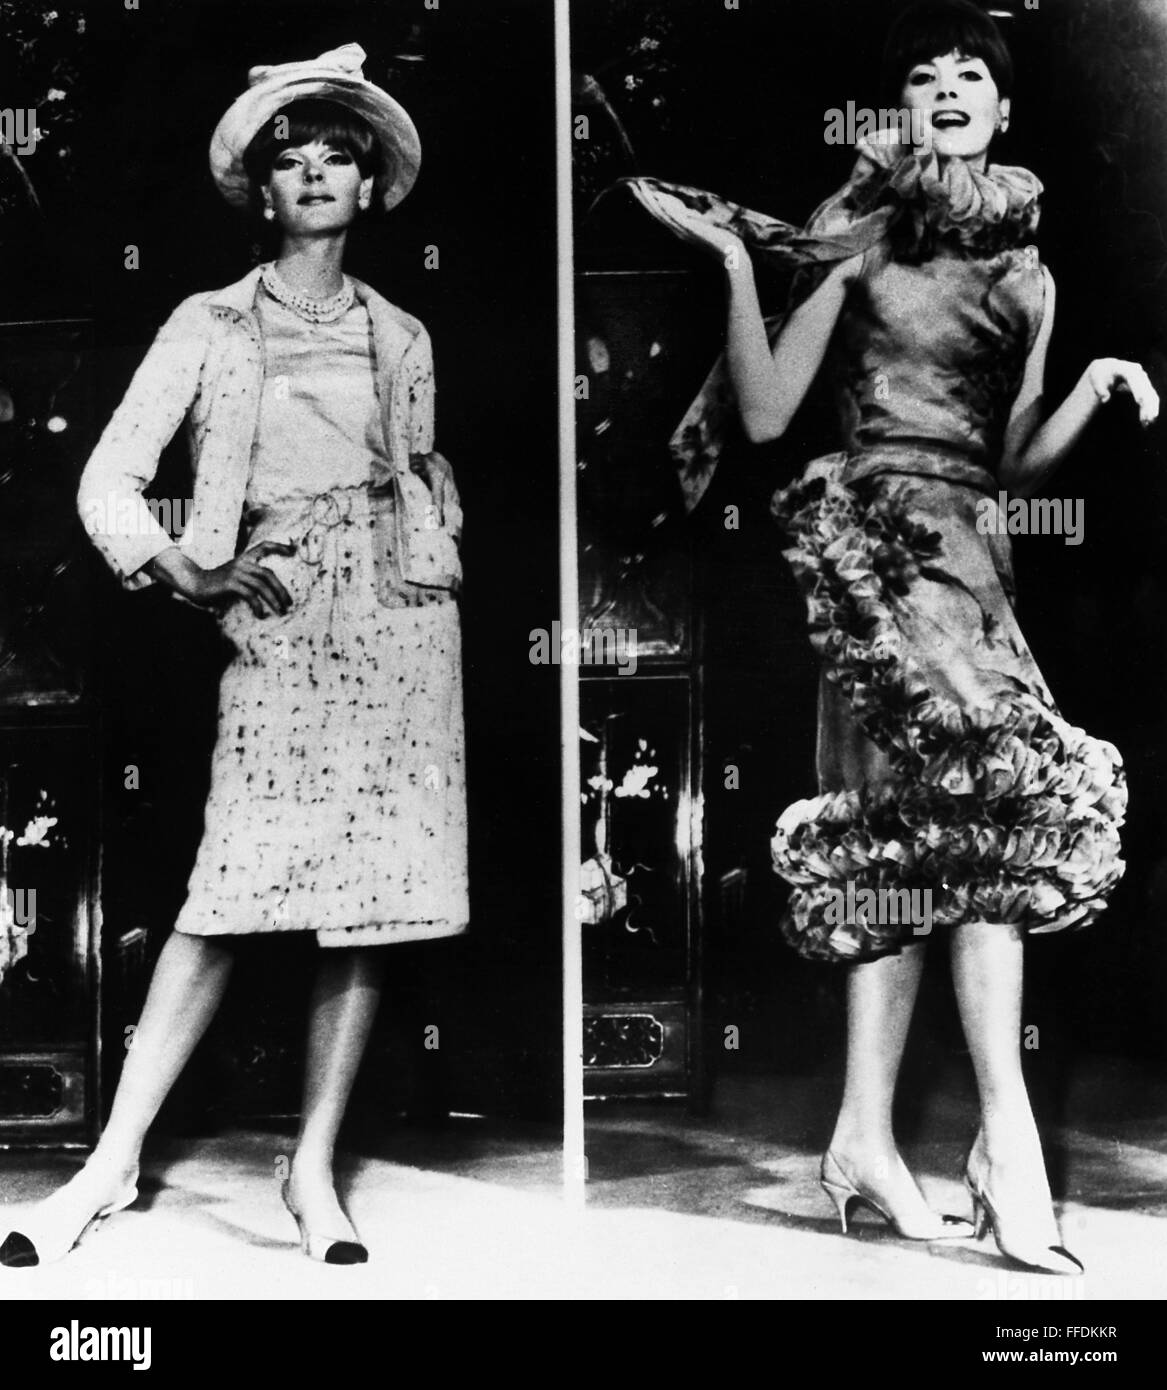 CHANEL DRESSES. /nWoman modelling dresses designed by Coco Chanel, 1960s  Stock Photo - Alamy